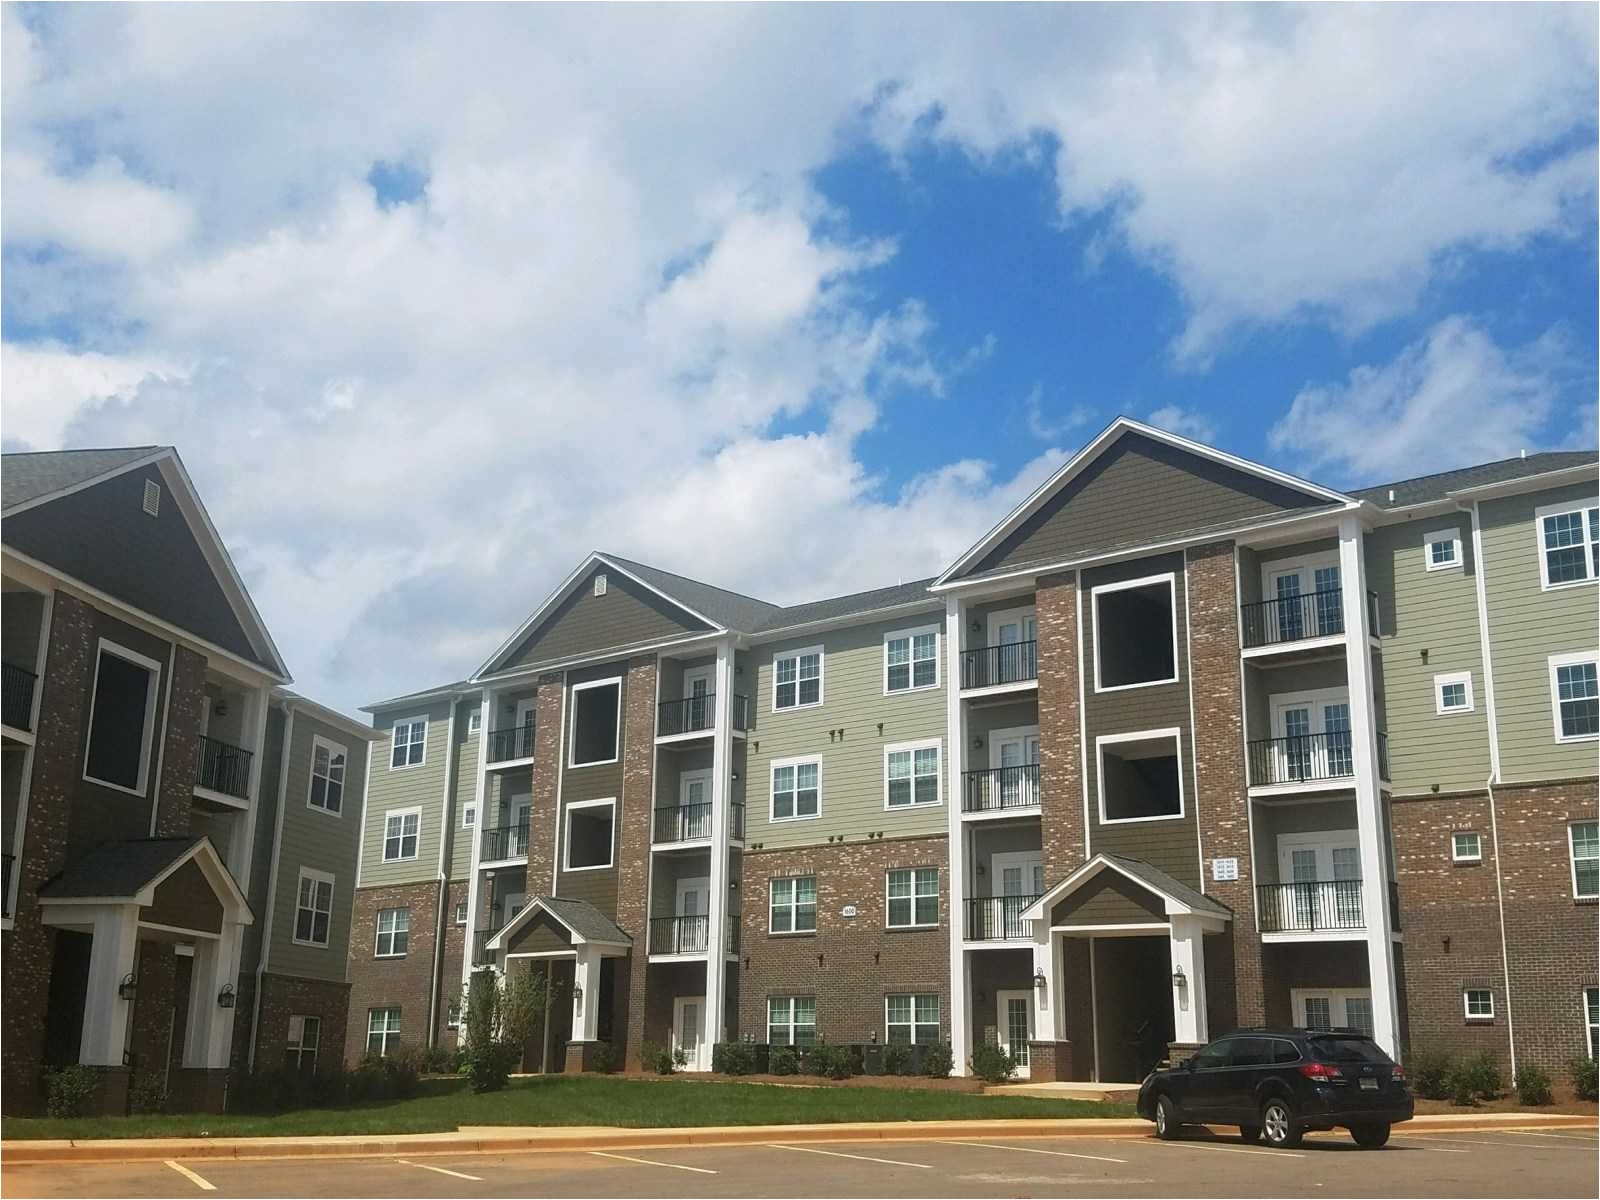 2 bedroom apartments in greenville nc new ardmore at the park apartments greenville sc collection